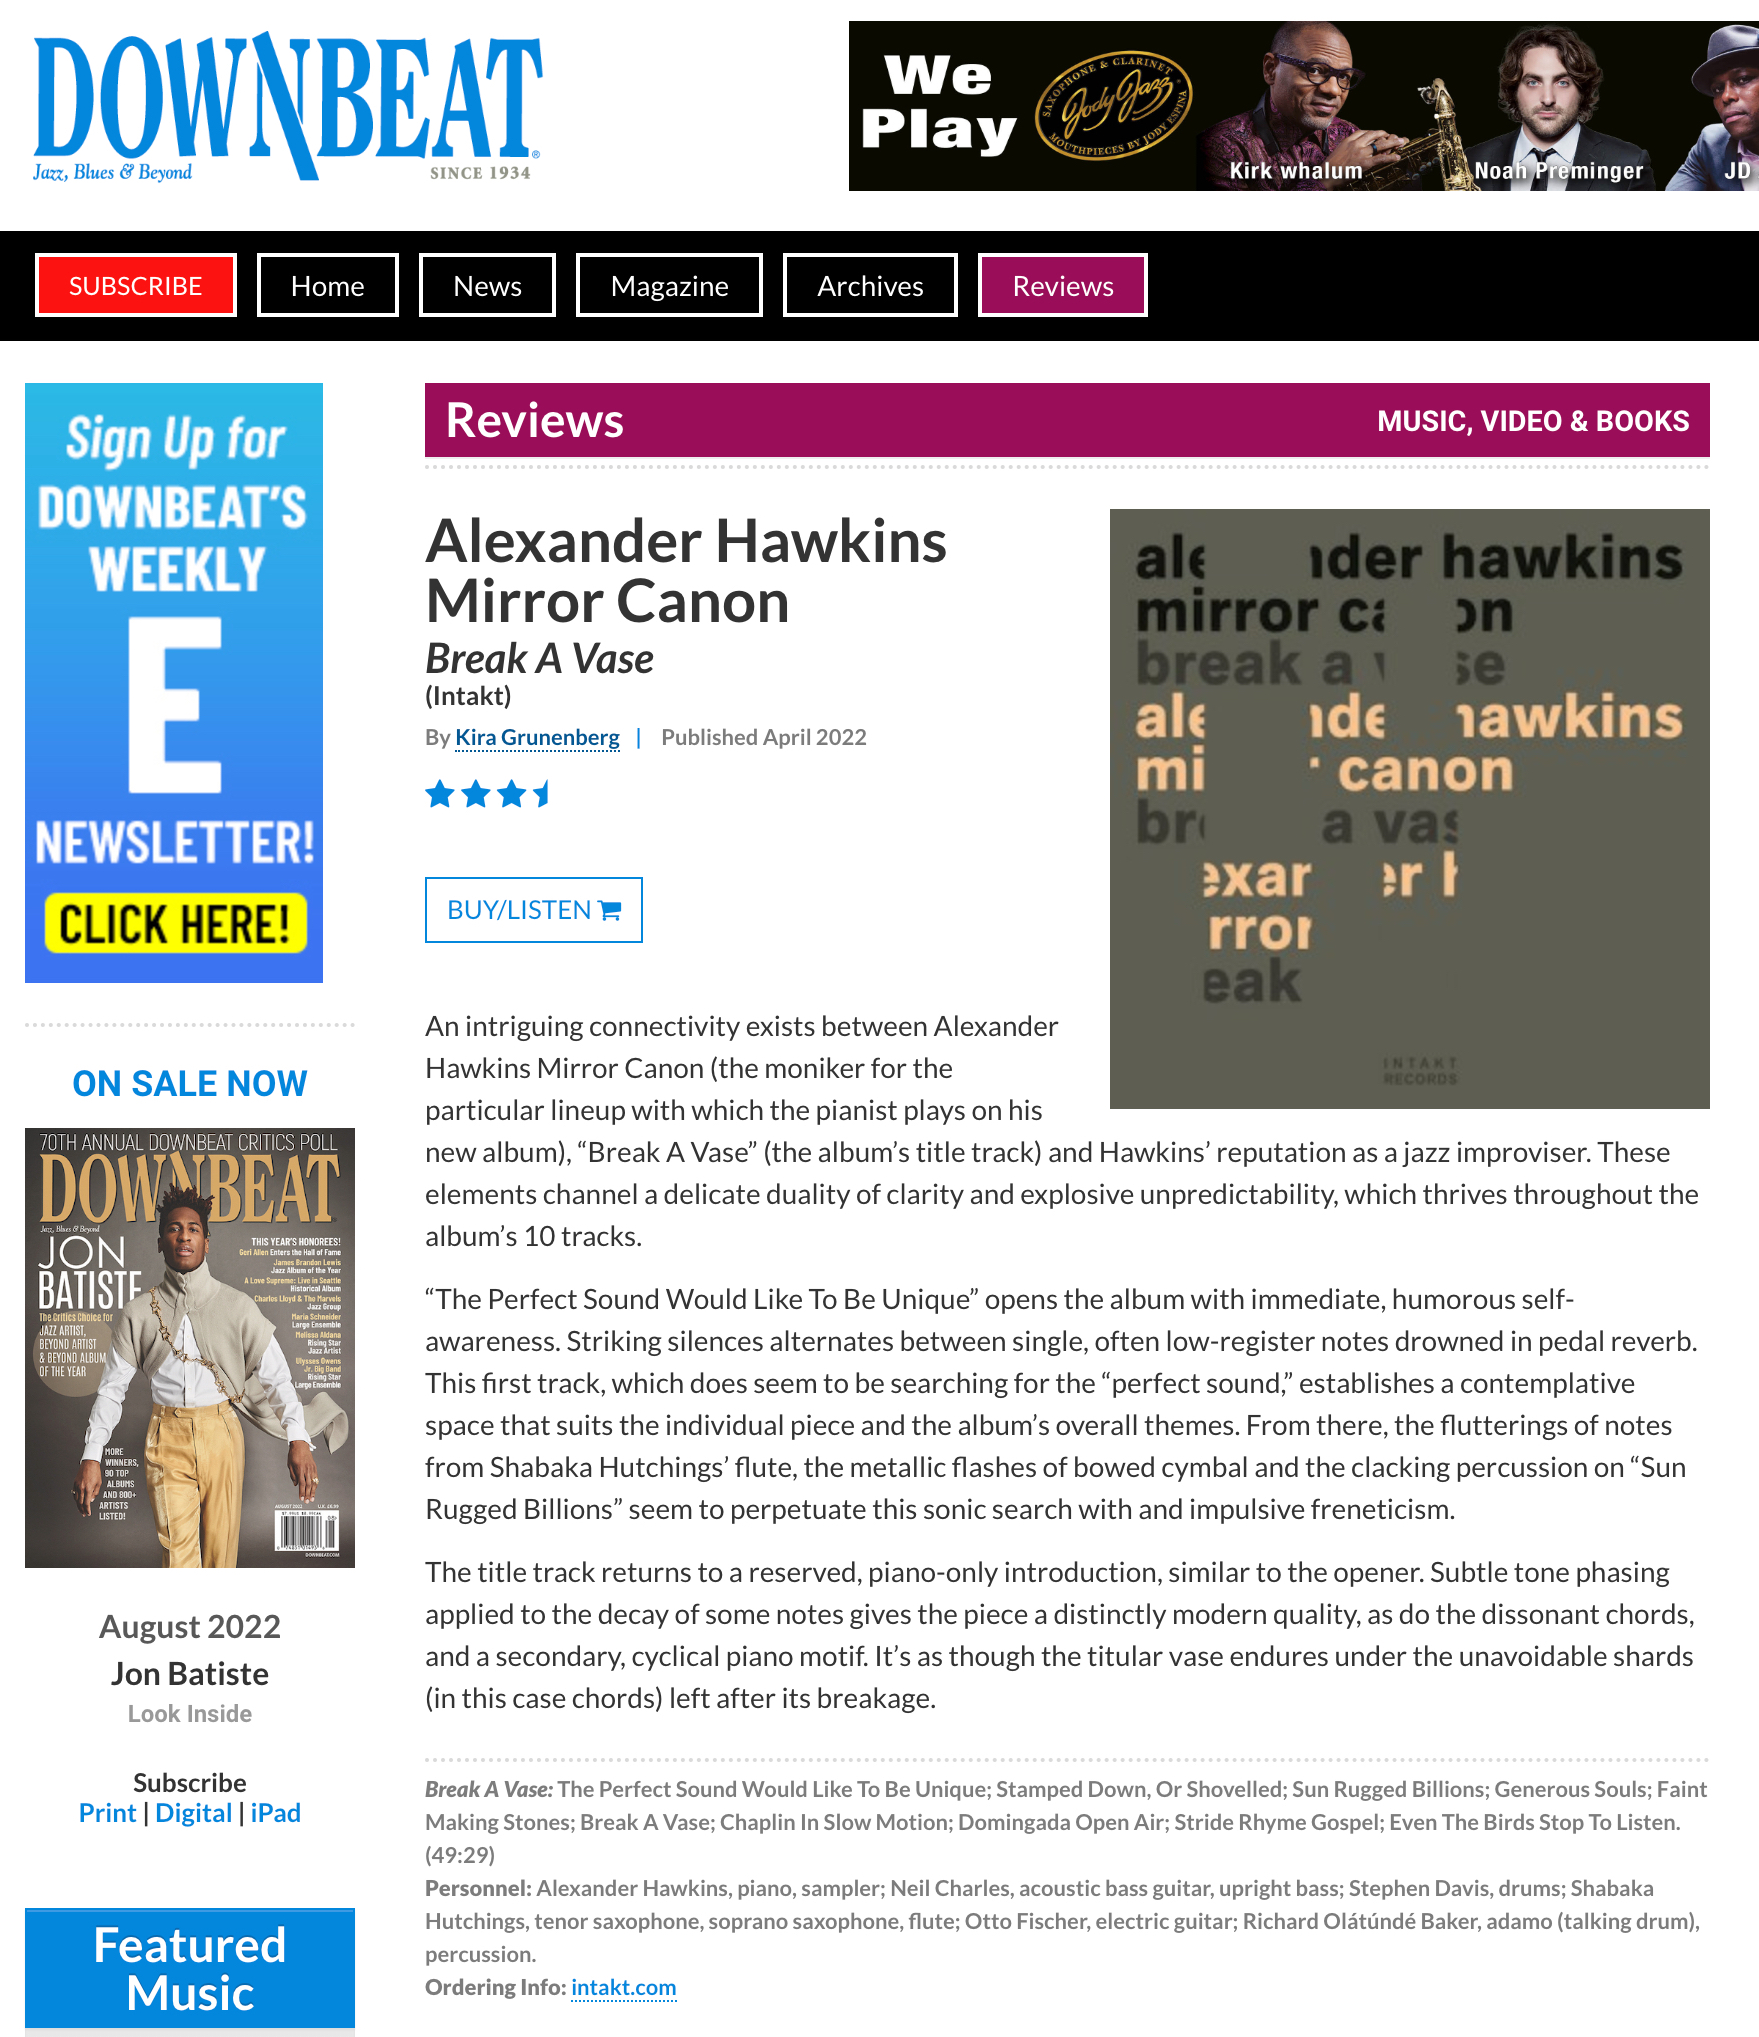 An intriguing connectivity exists between Alexander Hawkins Mirror Canon (the moniker for the particular lineup with which the pianist plays on his new album), “Break A Vase” (the album’s title track) and Hawkins’ reputation as a jazz improviser. These elements channel a delicate duality of clarity and explosive unpredictability, which thrives throughout the album’s 10 tracks.